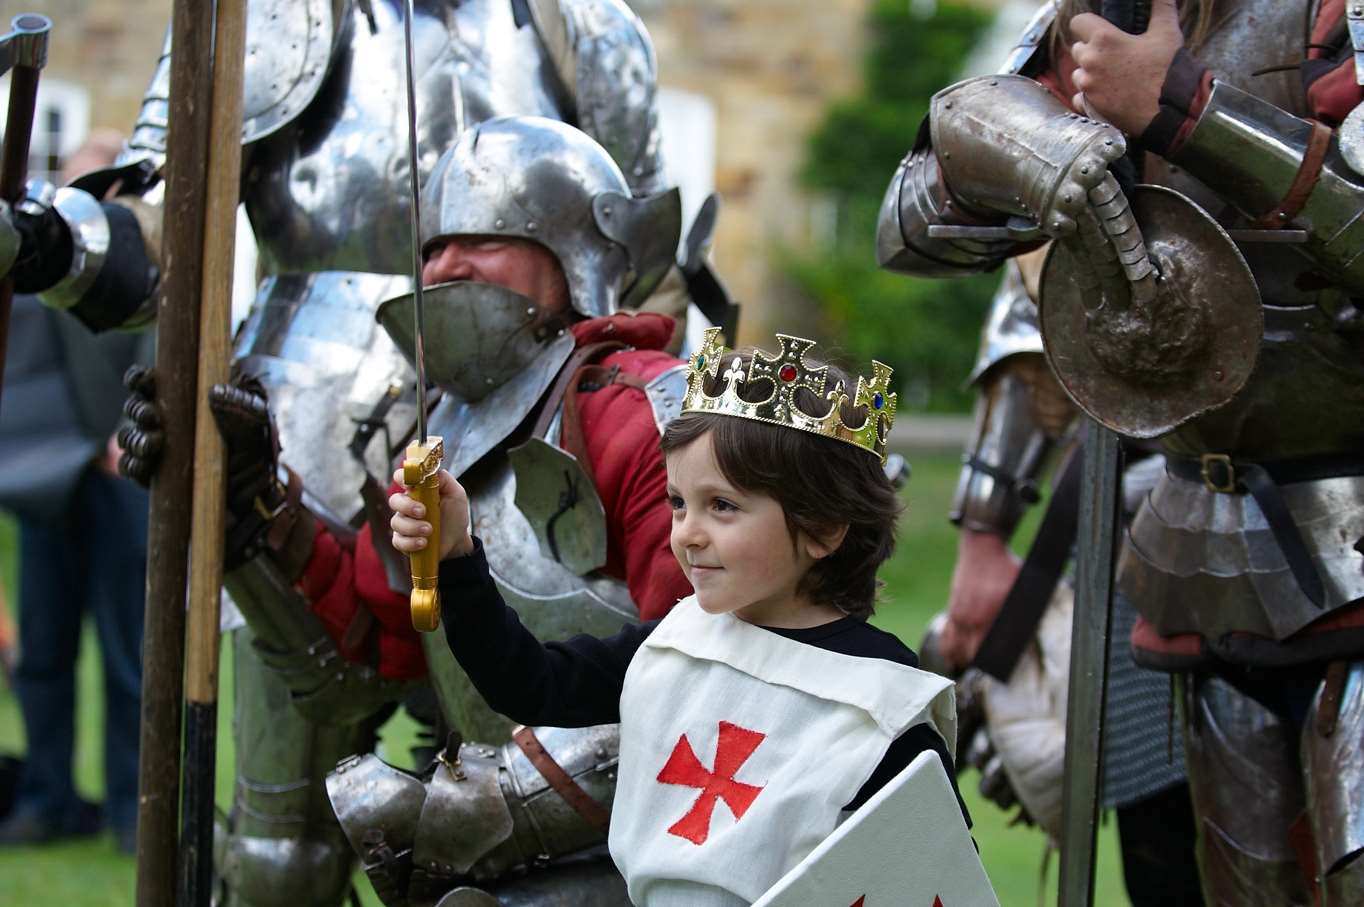 A young Knight was suited up in medieval armour